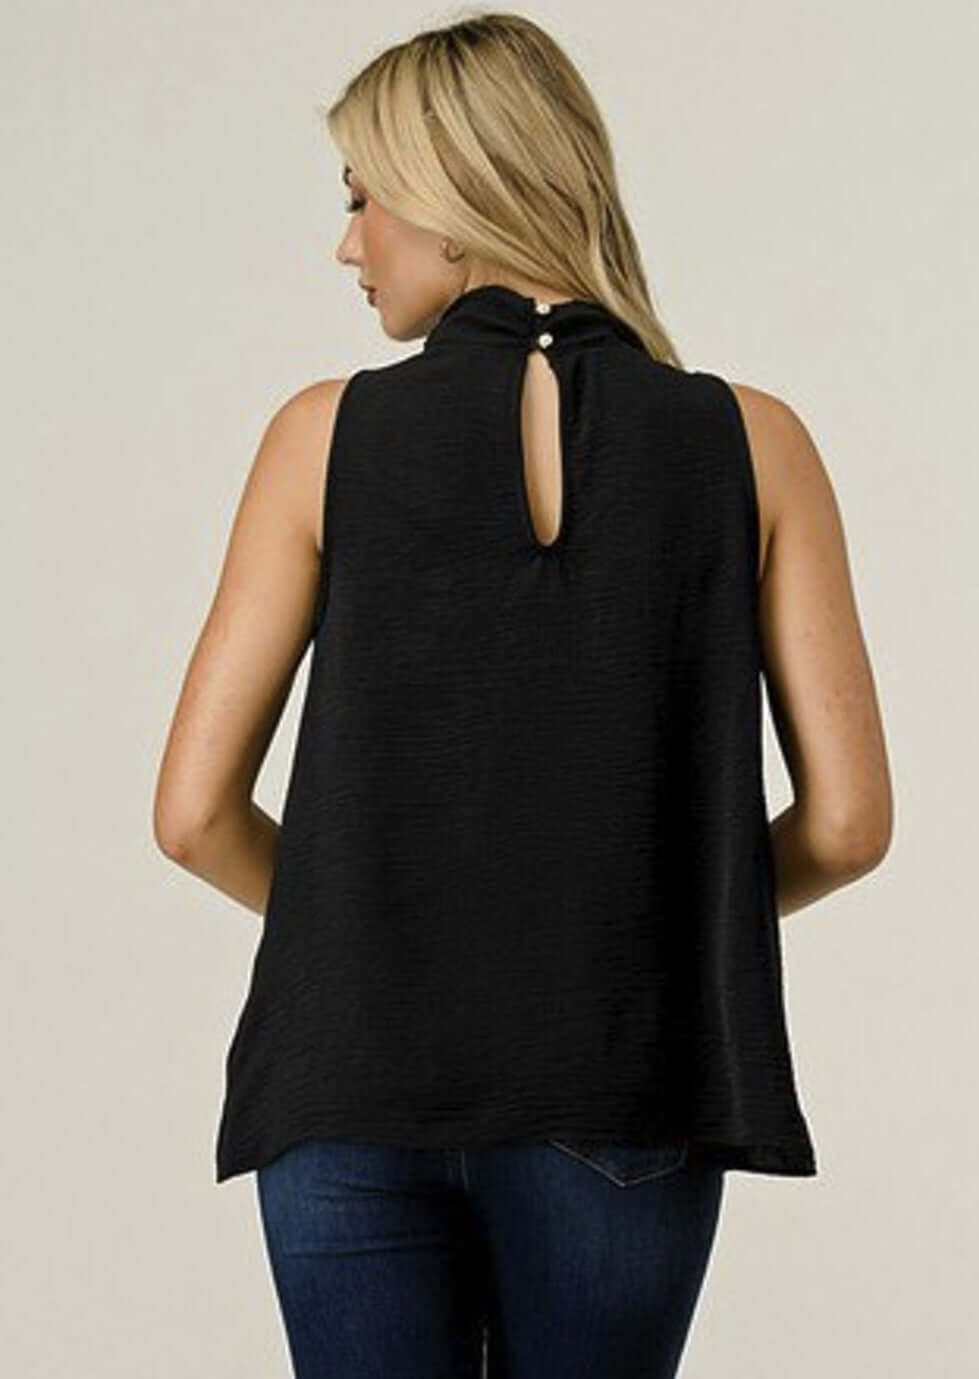 Ladies Black Satin Cowl Neck Sleeveless Jersey Blouse  | Made in USA | Classy Cozy Cool Women's Made in America Clothing Boutique